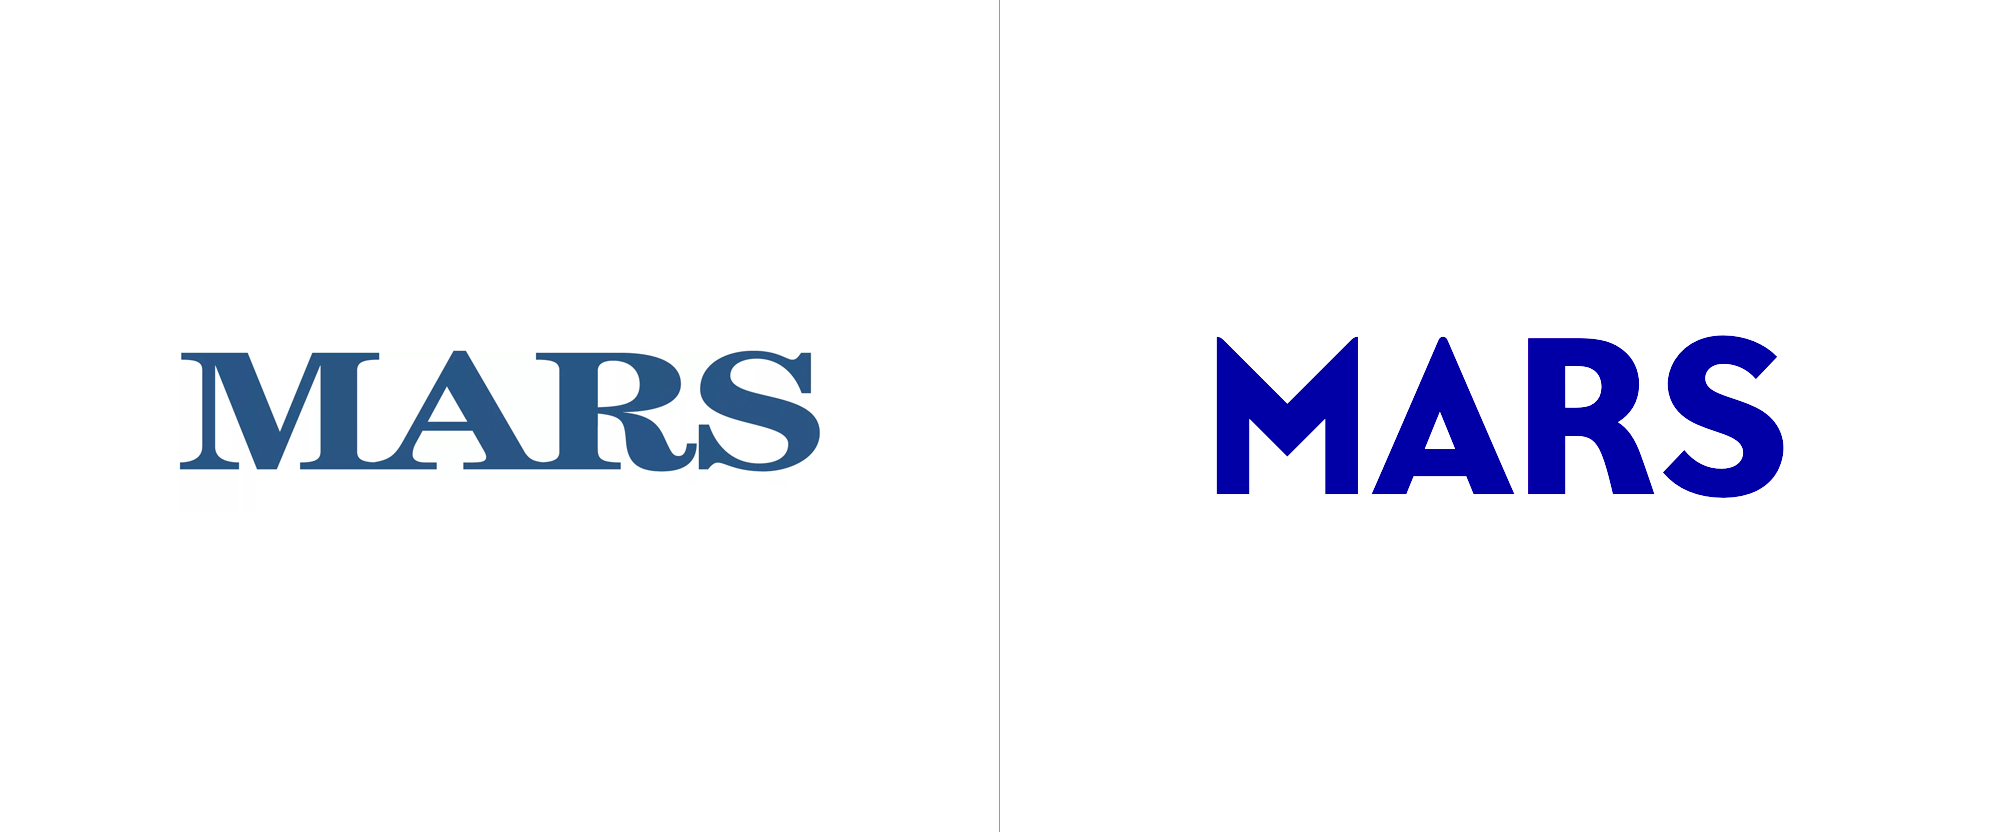 Follow-up: New Logo and Identity for Mars by Jones Knowles Ritchie